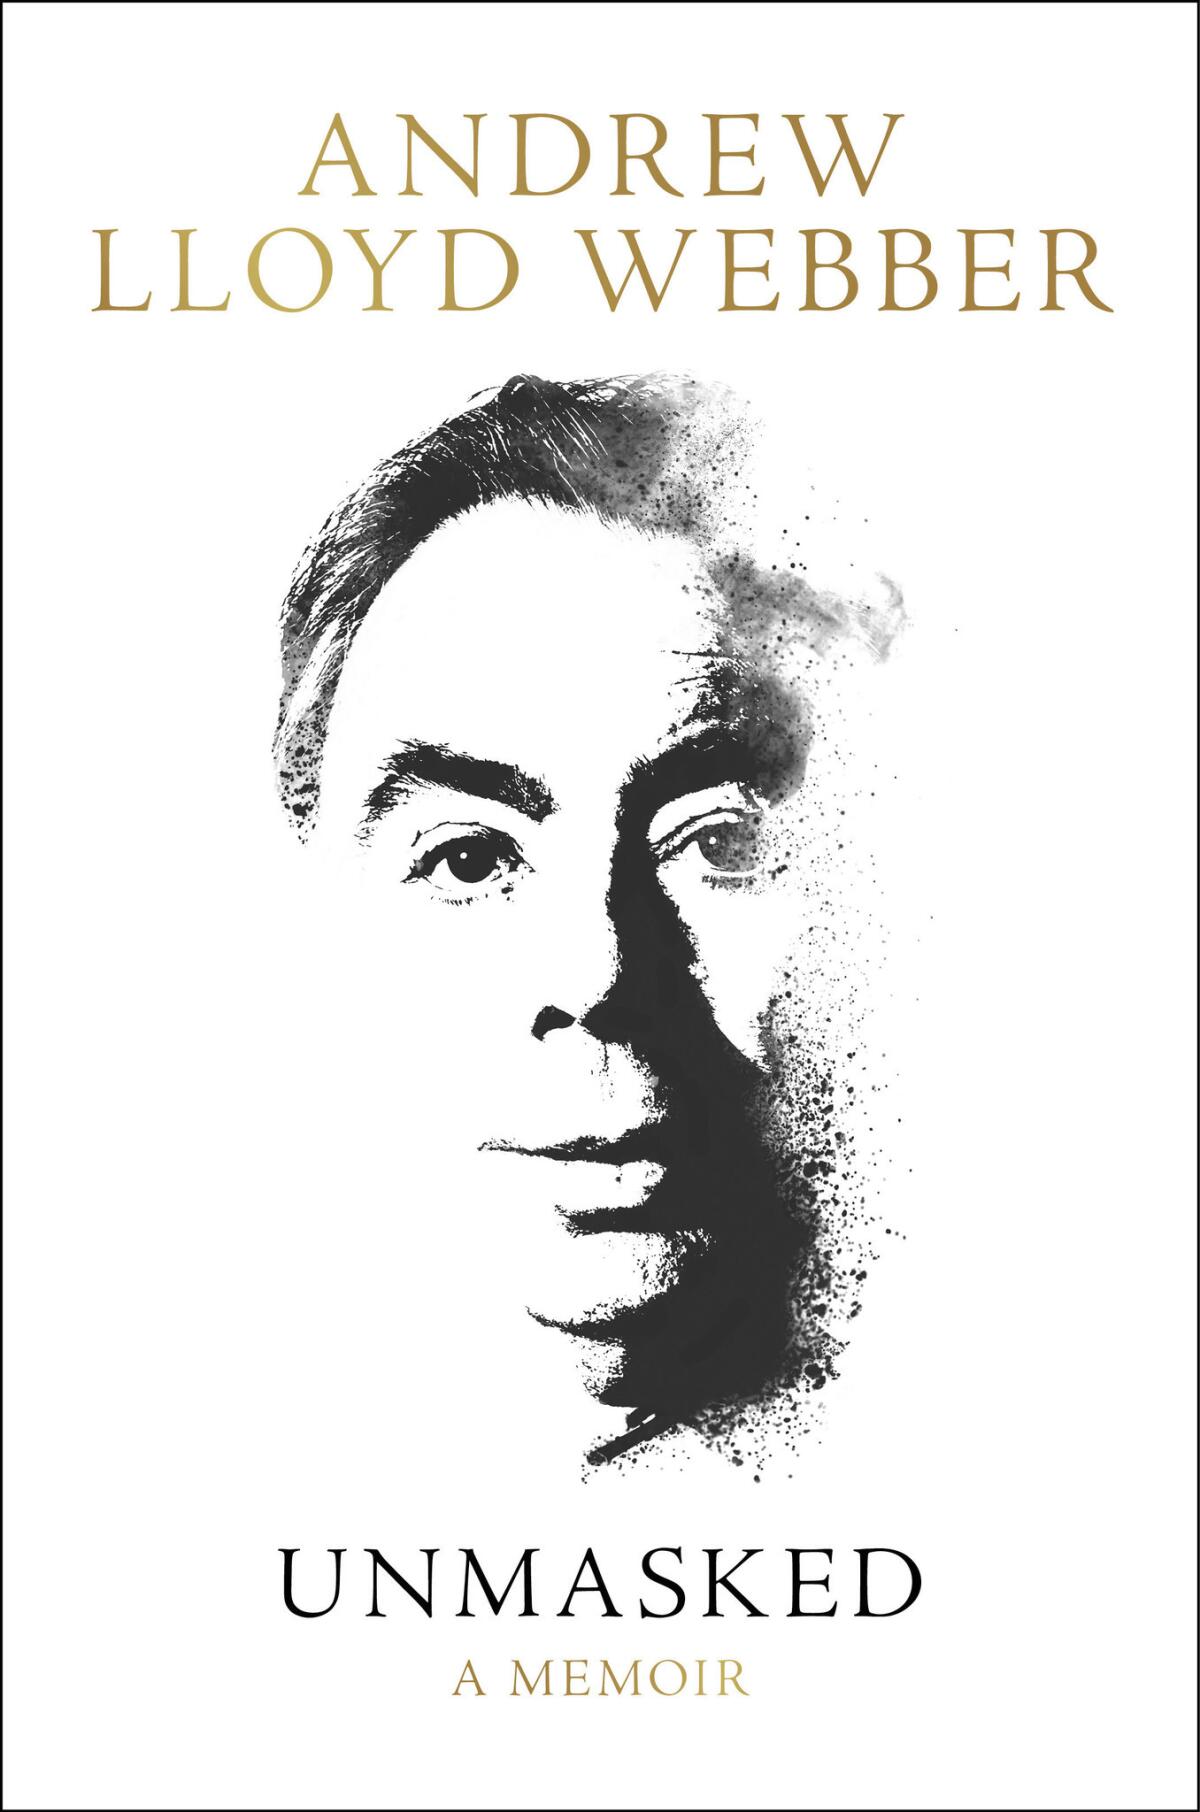 "Unmasked" by Andrew Lloyd Webber hits shelves Tuesday.